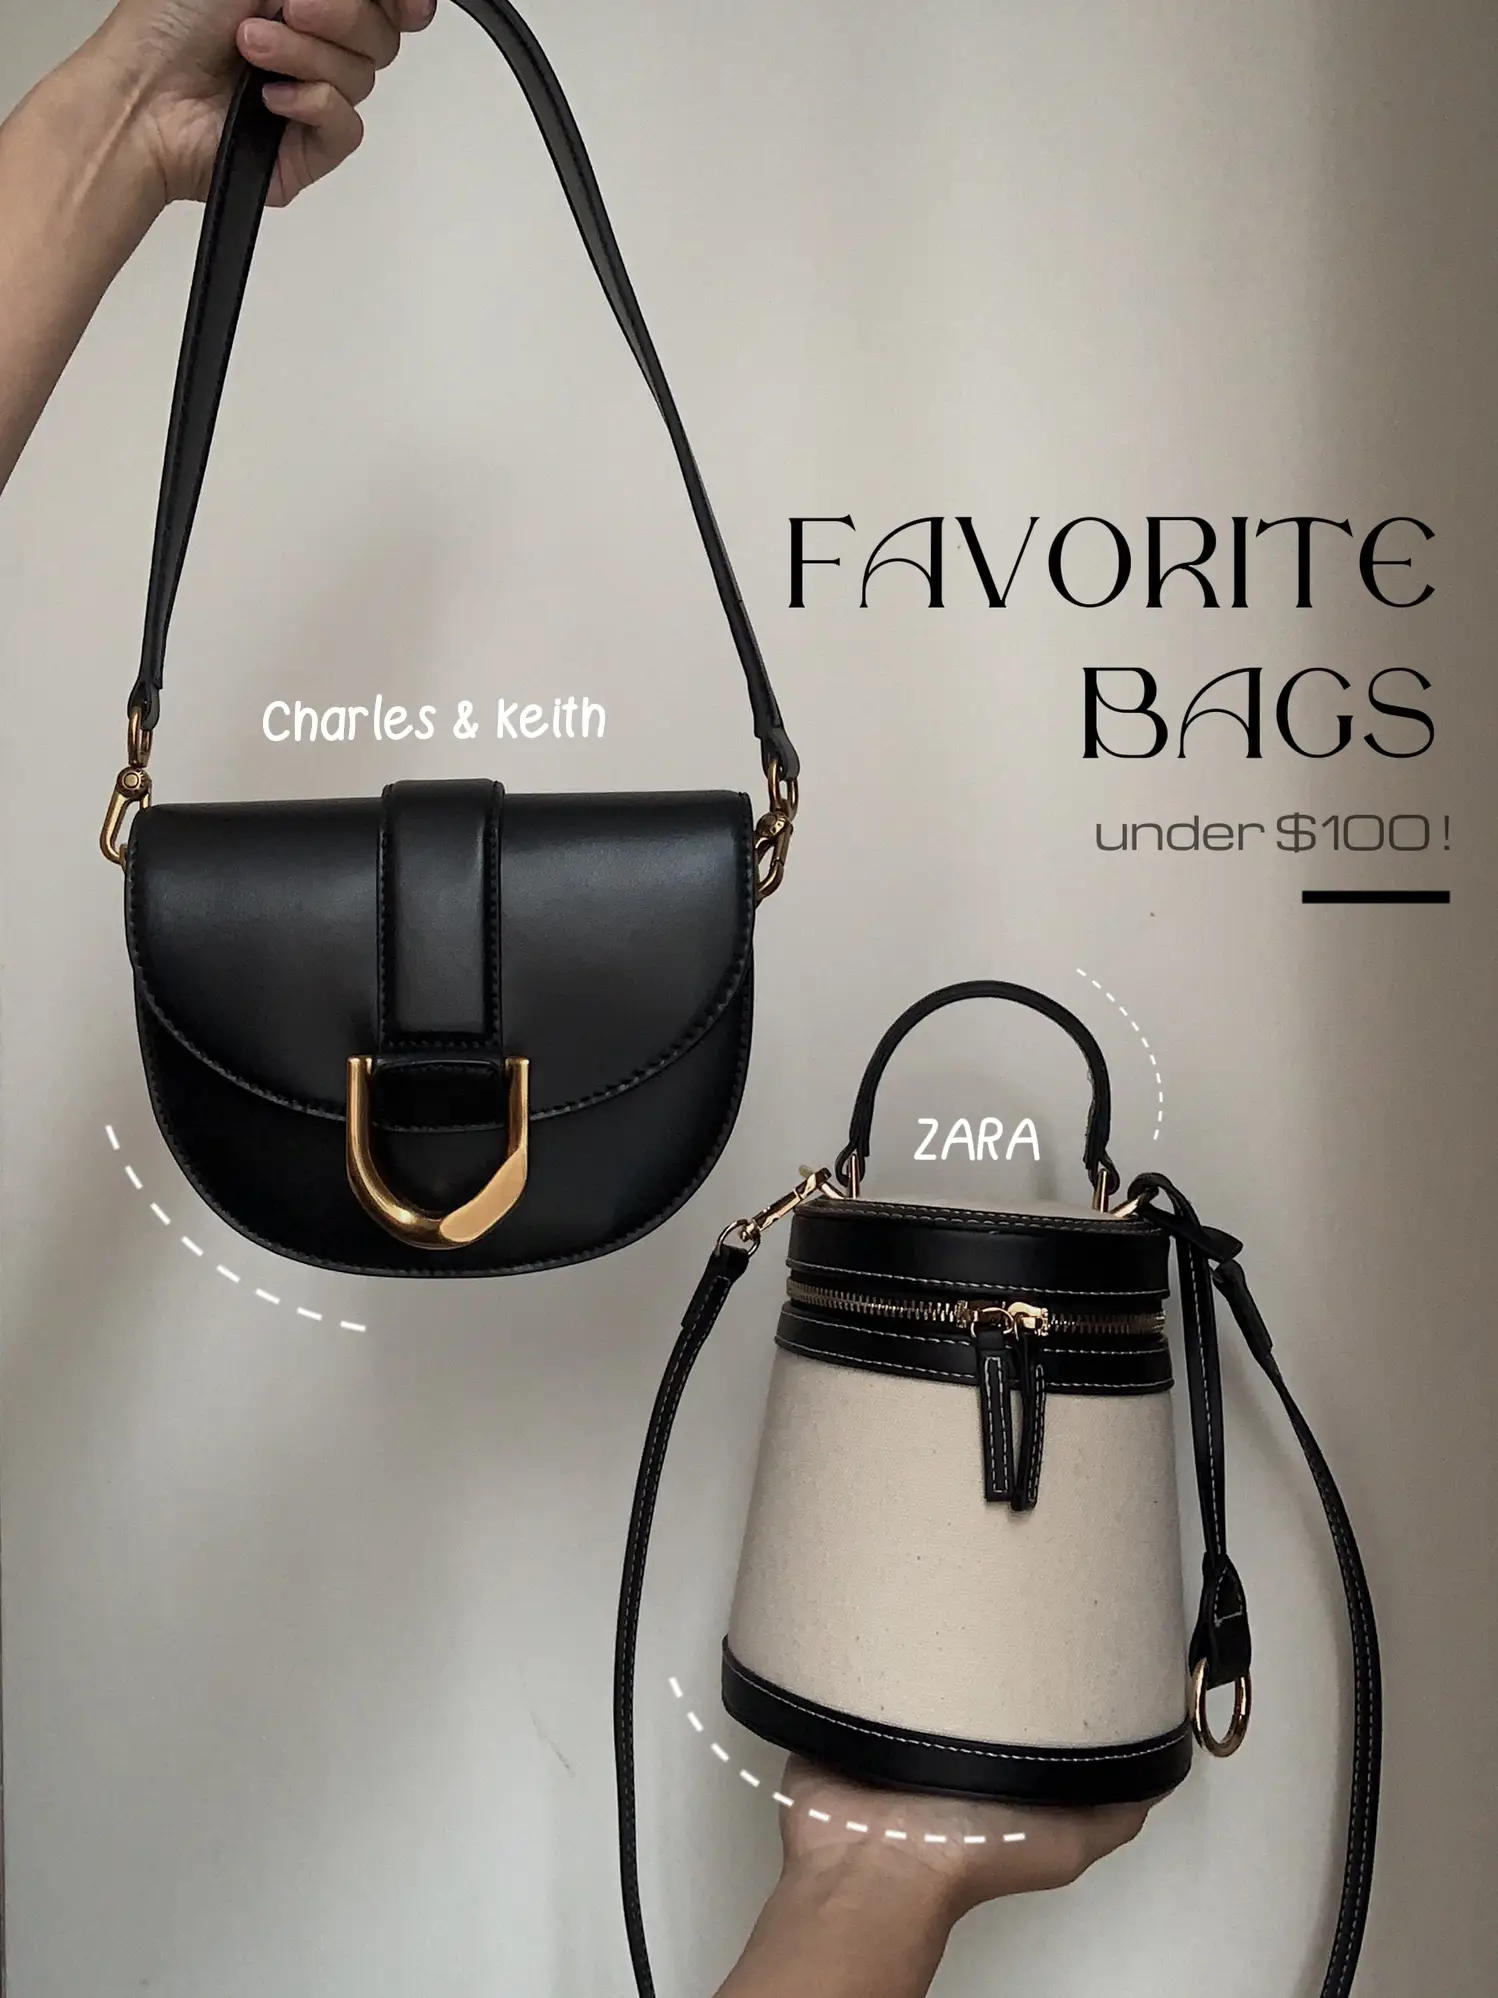 A Zara for shoes and bags, Singapore's Charles & Keith has reached